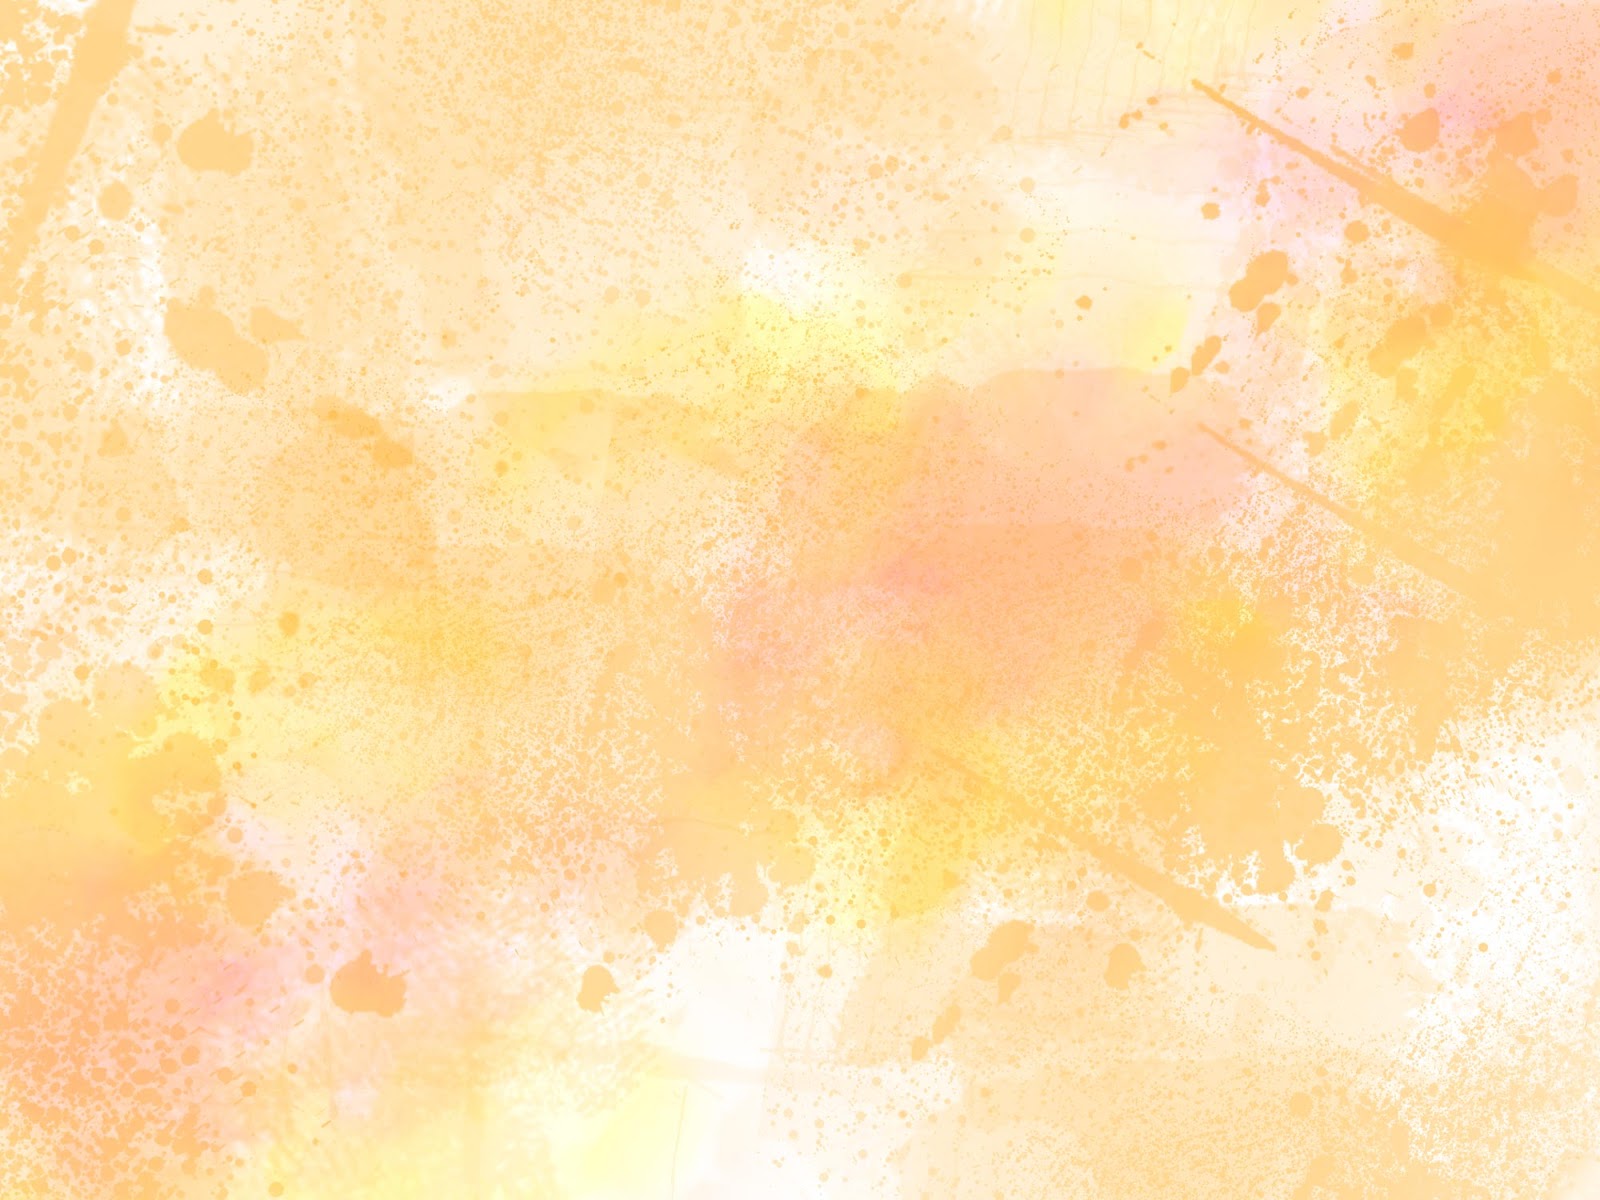 Pastel orange grunge background with yellow and pink highlights